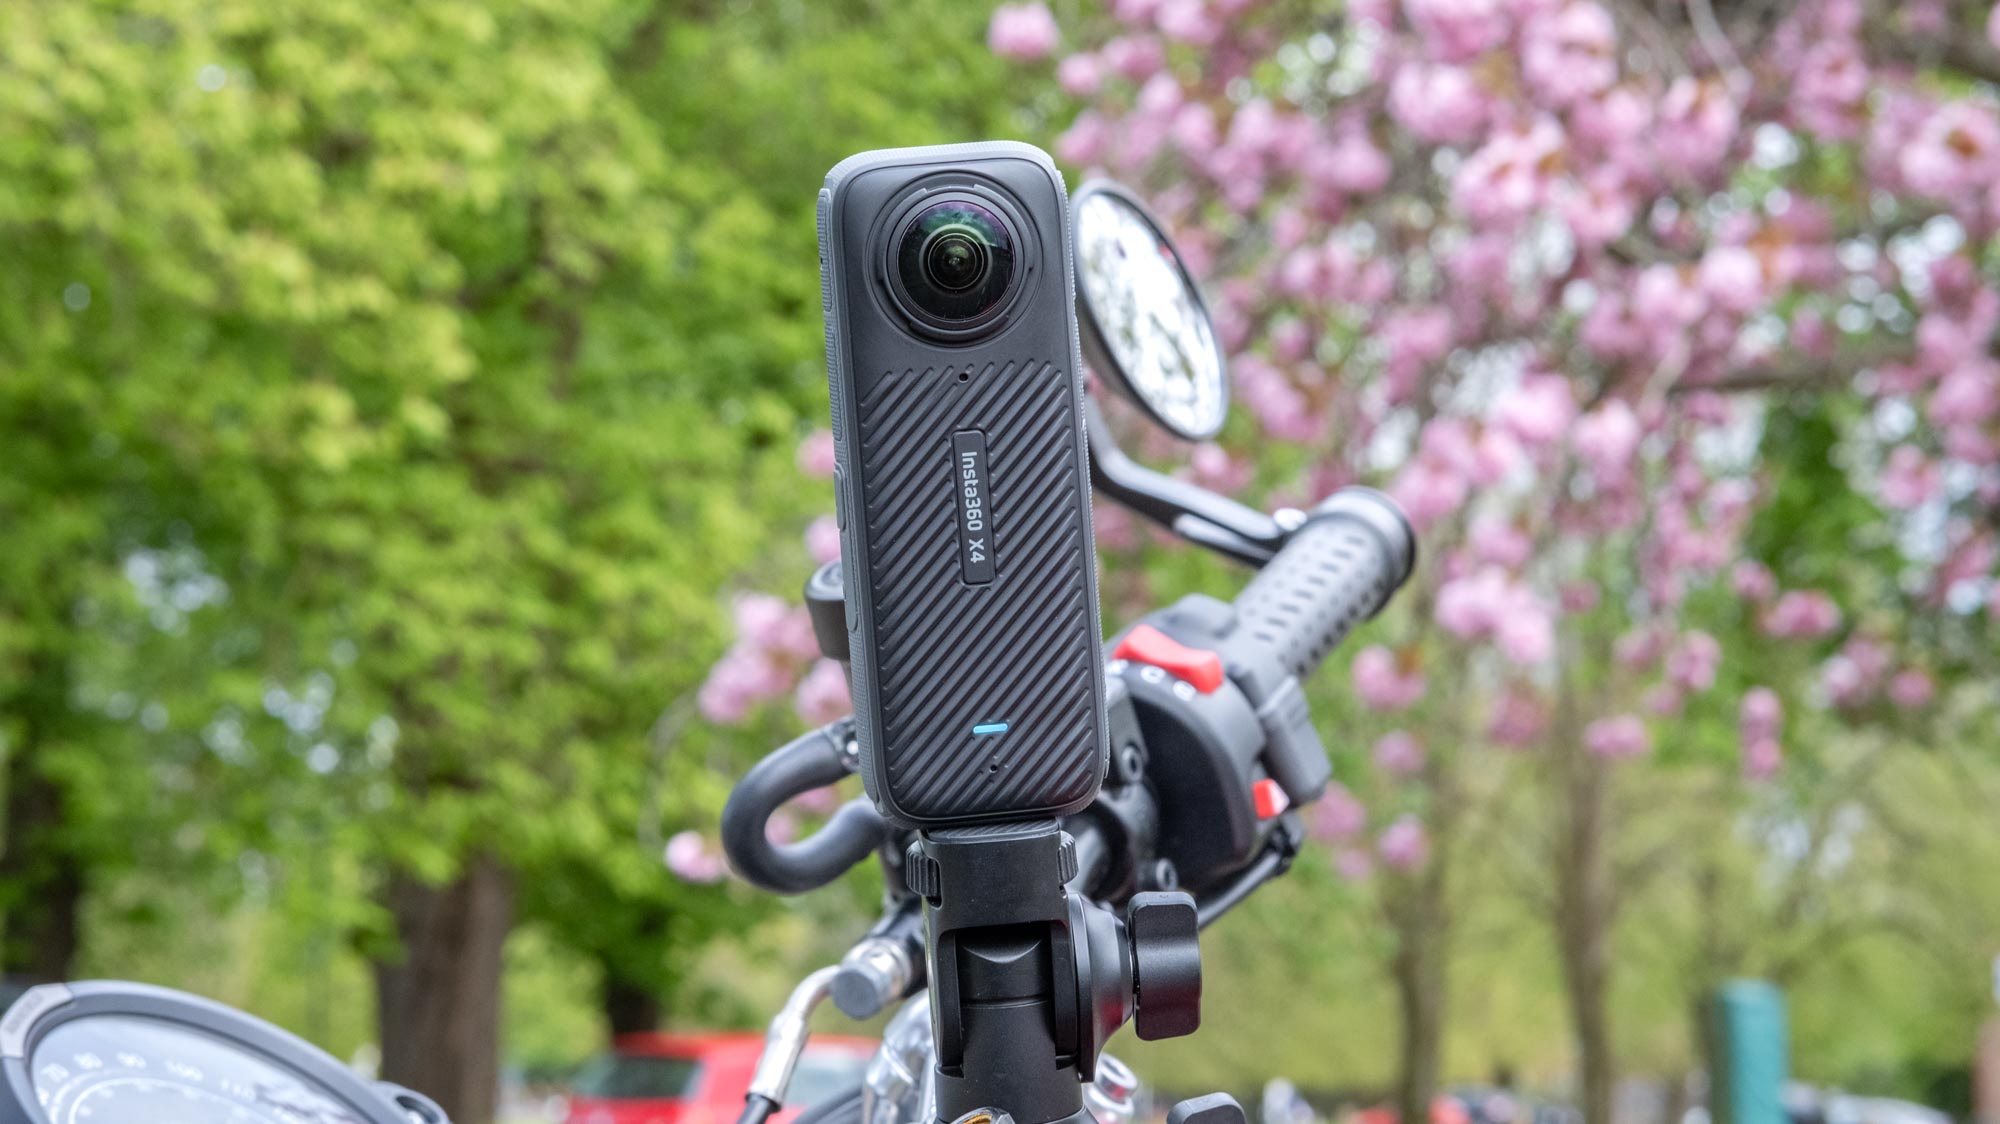 A photo of the Insta360 X4 mounted on motorcycle handlebars with pink and green foliage in the background.